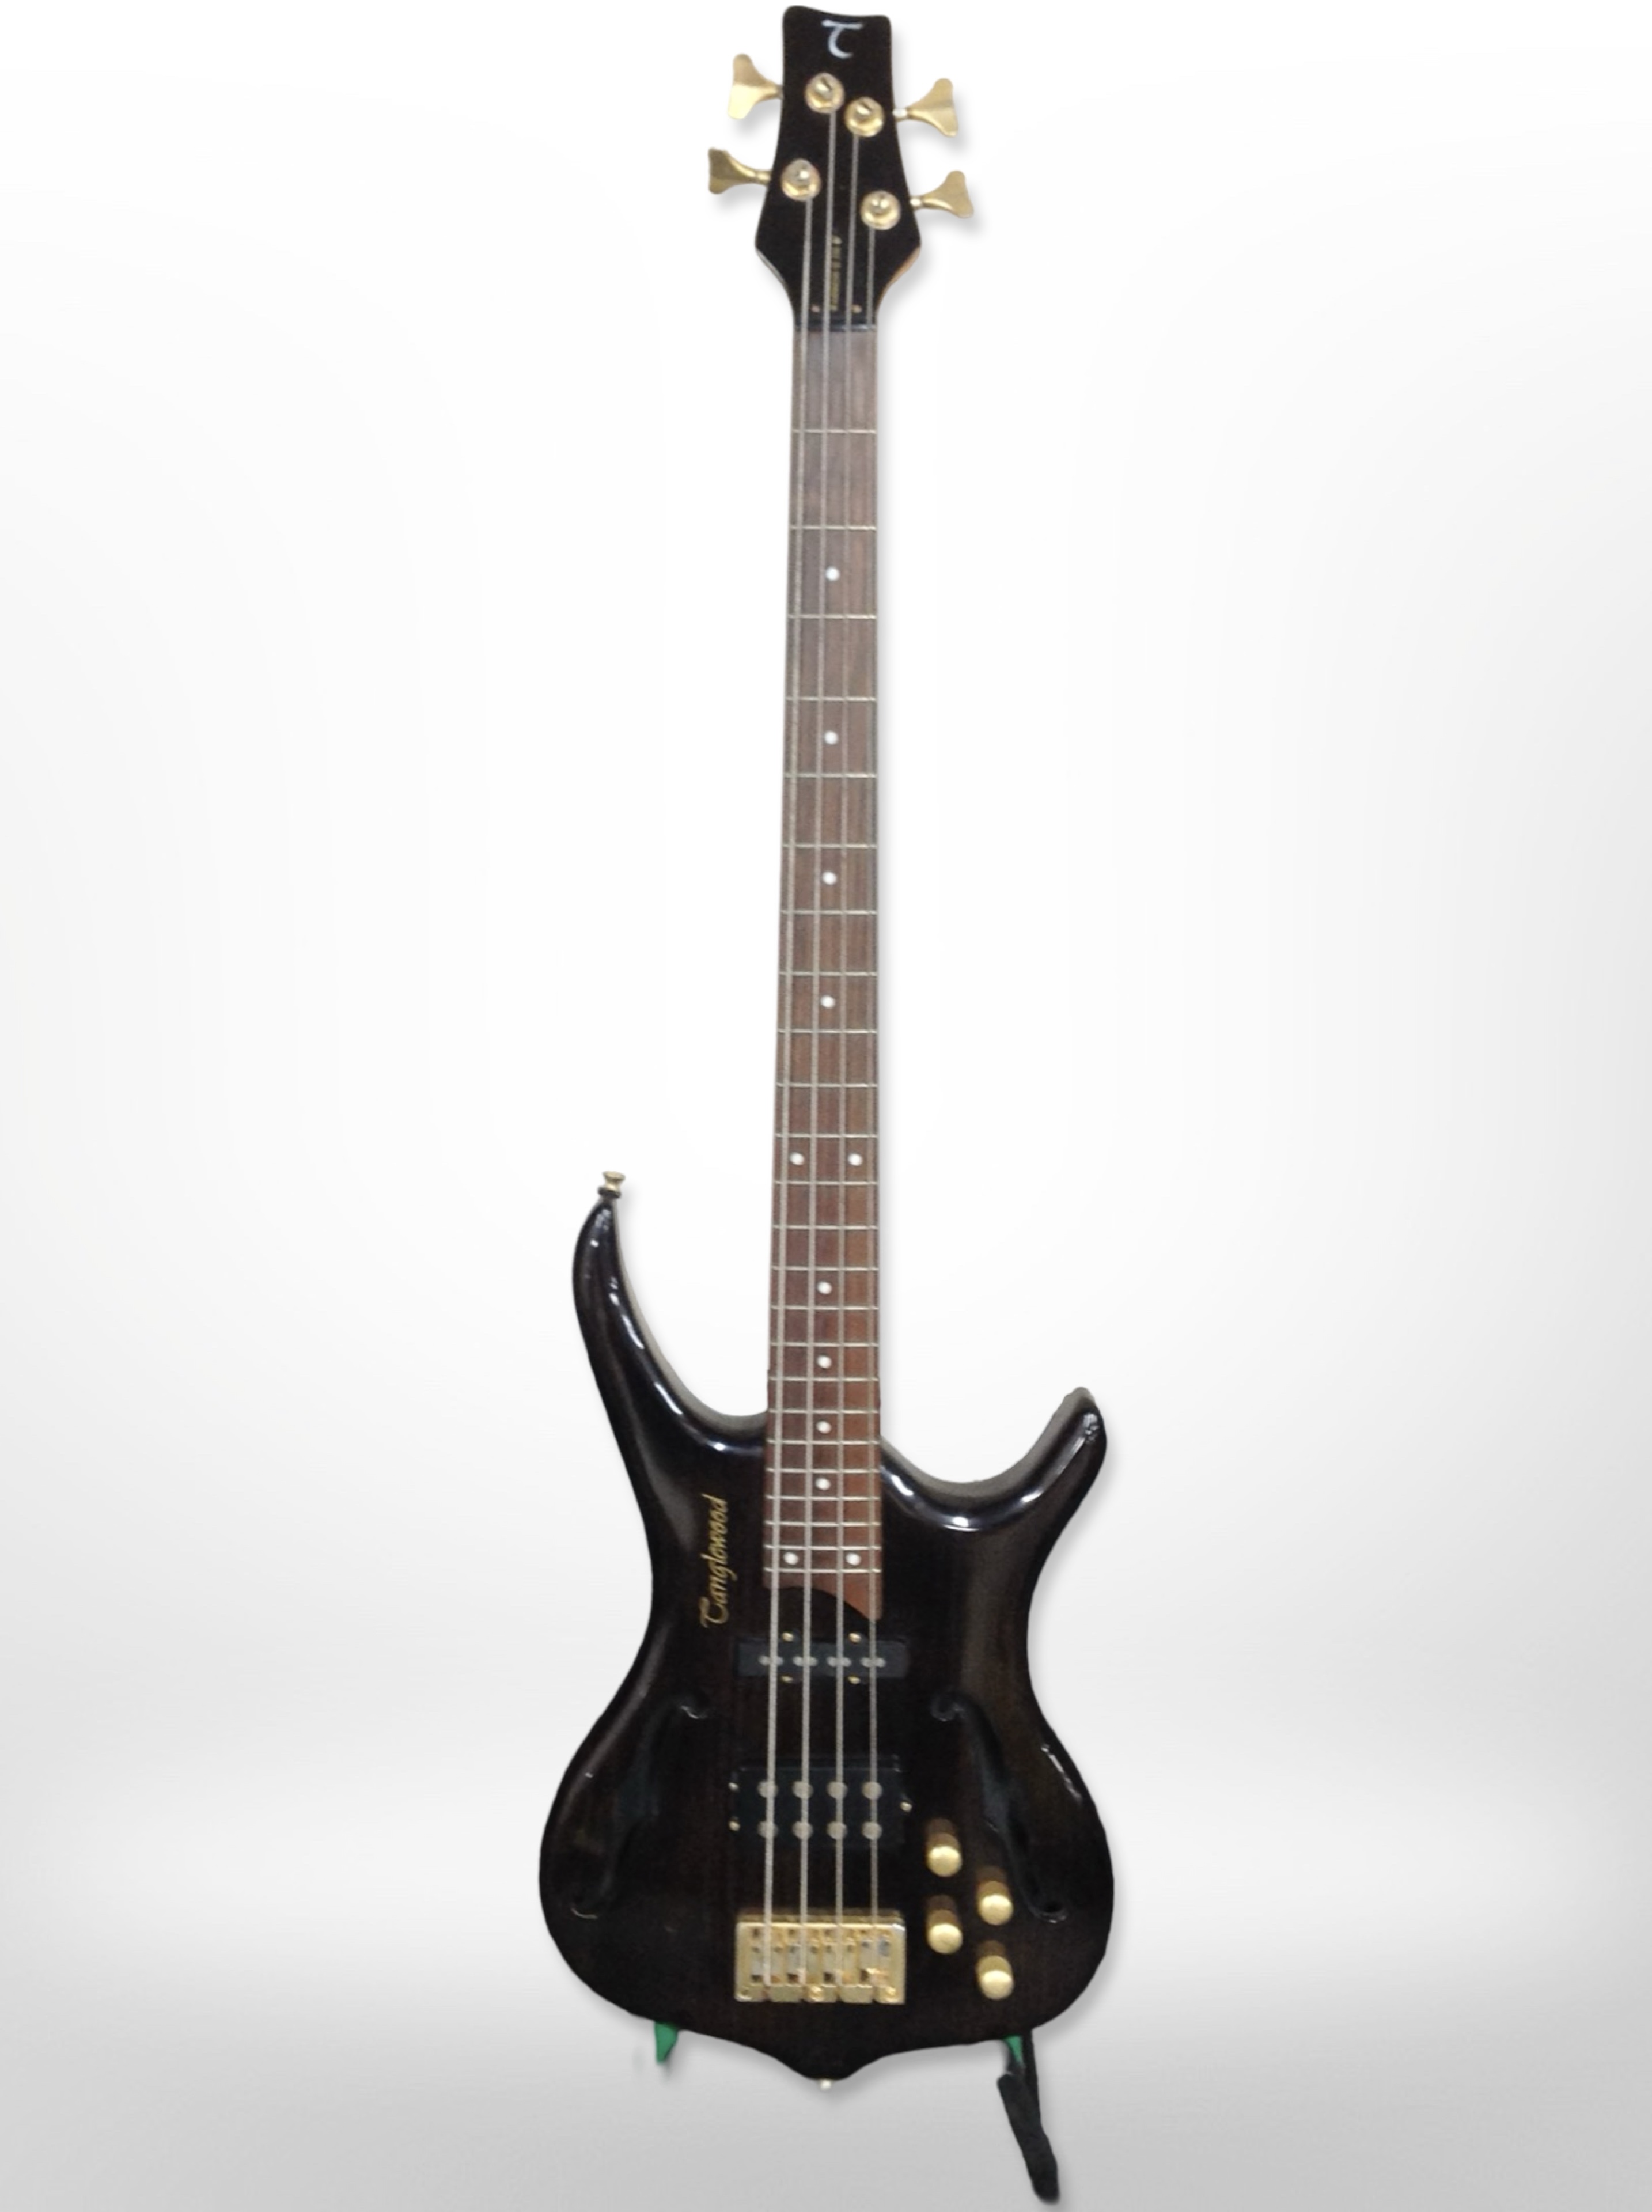 A Tanglewood Warrior III bass guitar with a guitar stand.